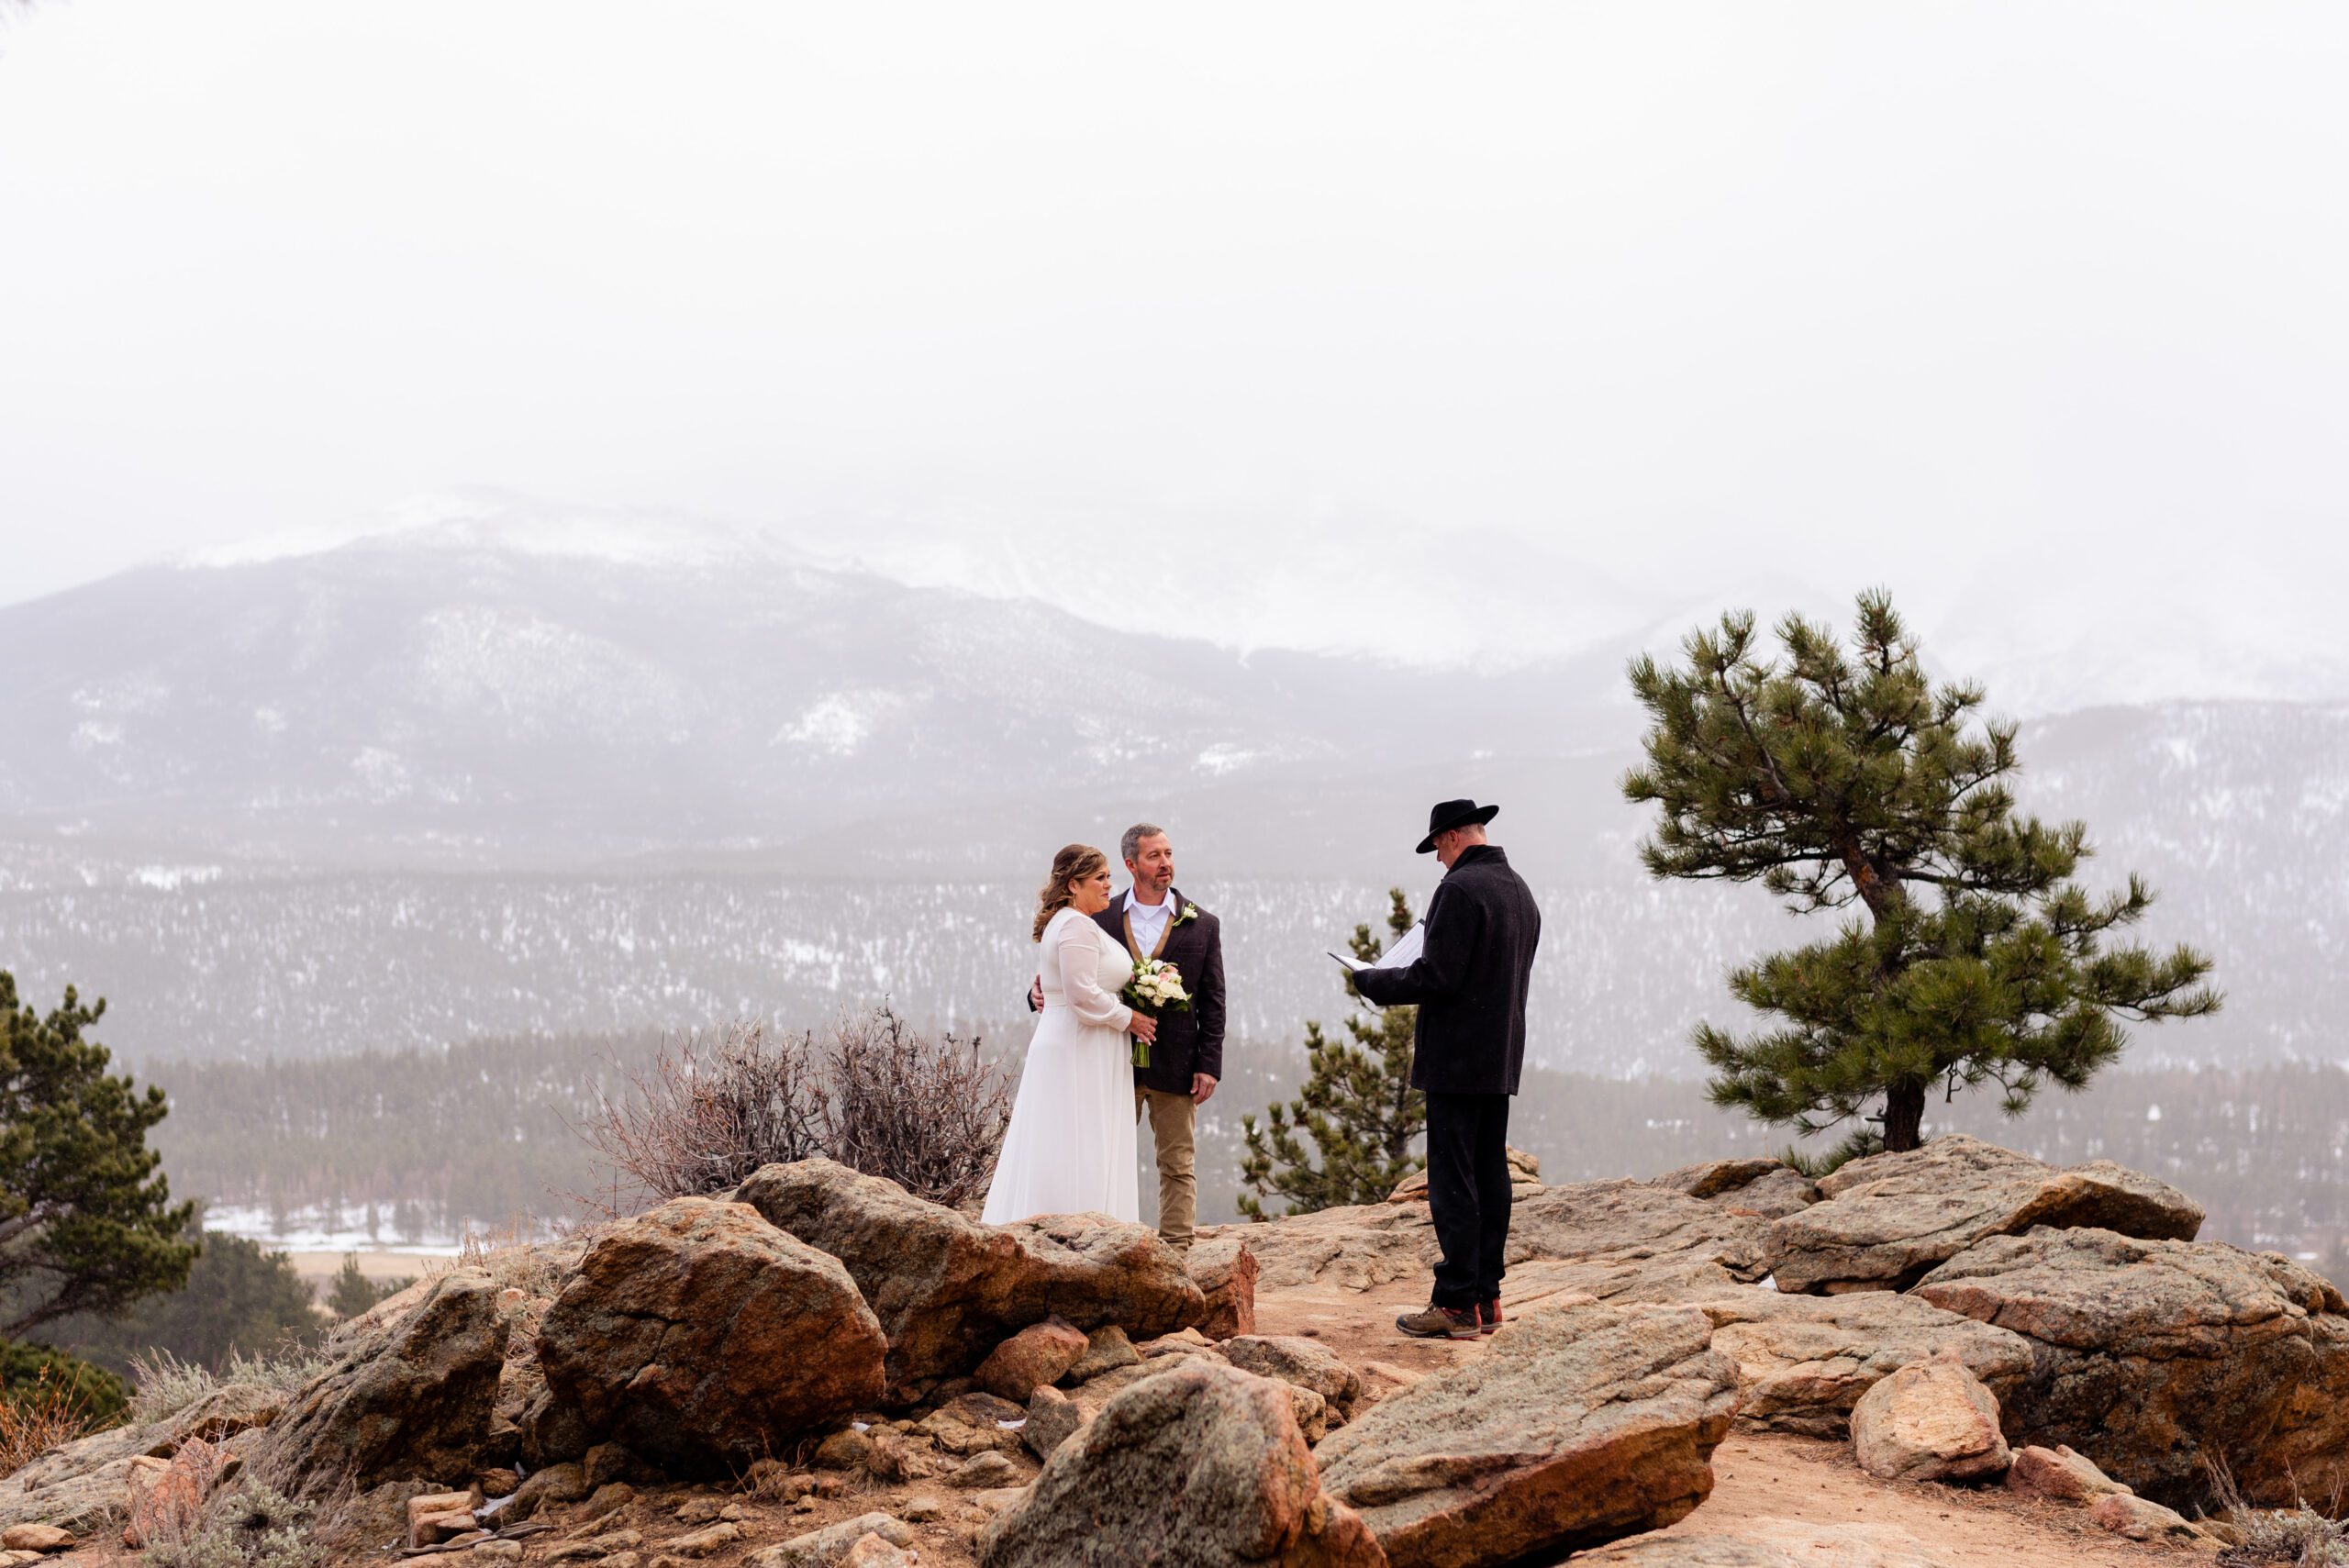 the snowy-white mountains in the distance, the bride and groom listen to the officiant during their spring elopement at 3M Curve.